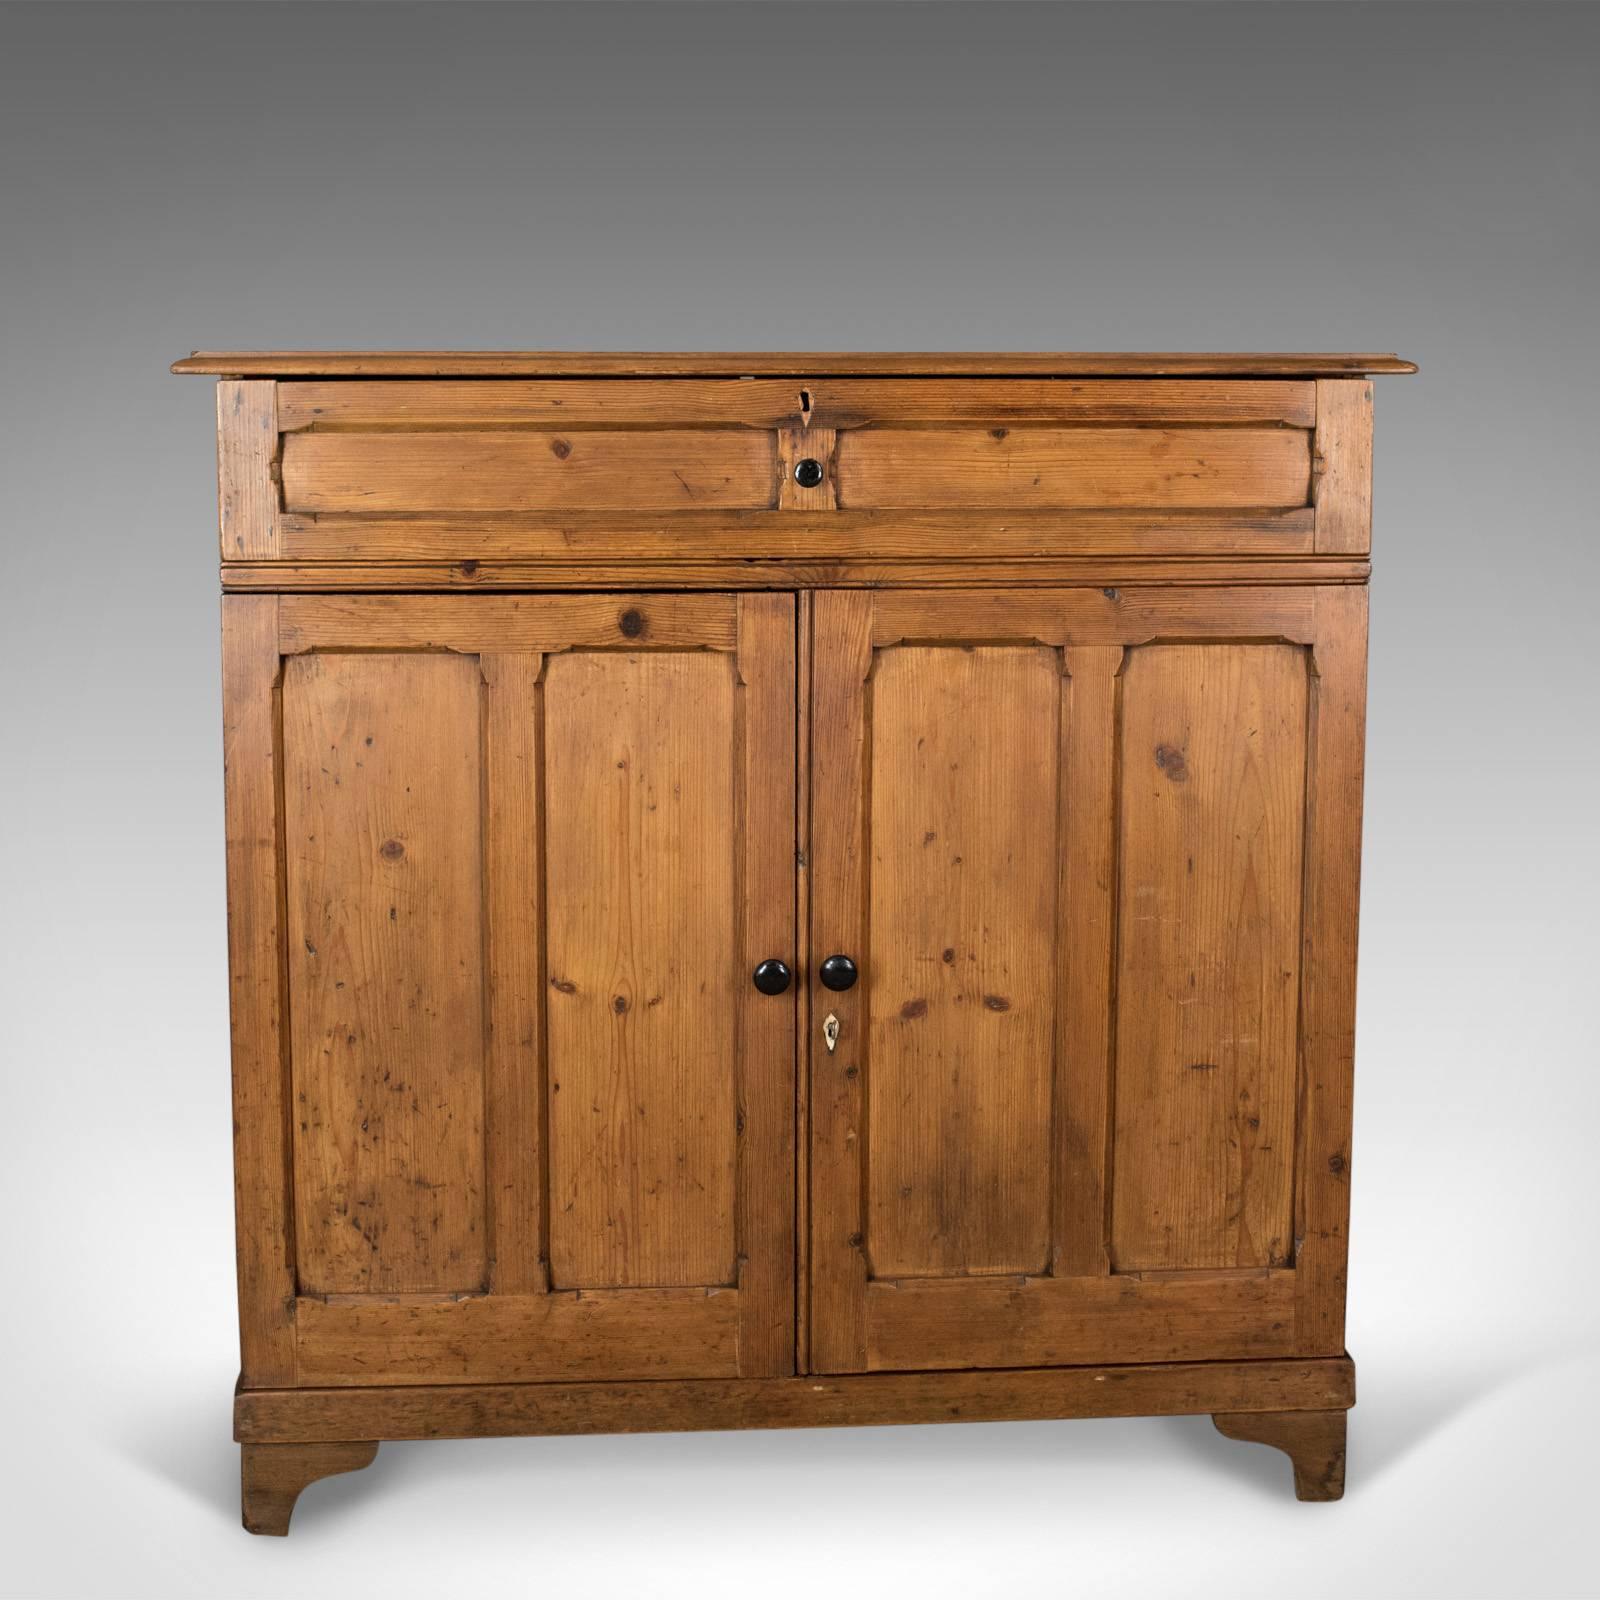 This is an antique pine cupboard, an English, Victorian, panelled cabinet in pitch pine dating to circa 1880.

Attractive honey hues to the antique pitch pine
Grain interest in the lustrous, wax polished finish
Desirable aged patina
Two plank